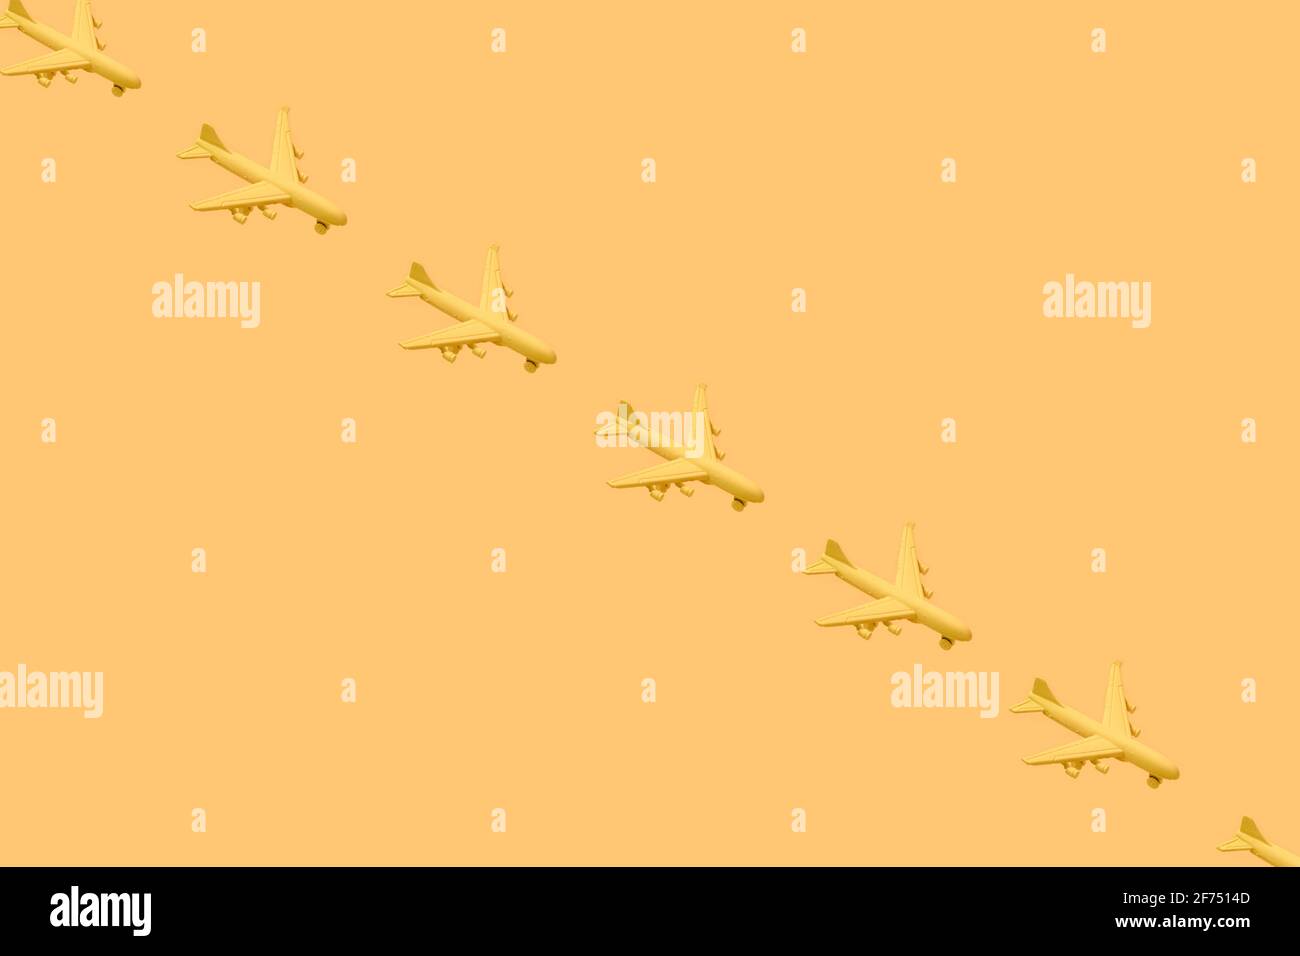 From above of composition of many little yellow airplanes placed against yellow background in studio Stock Photo